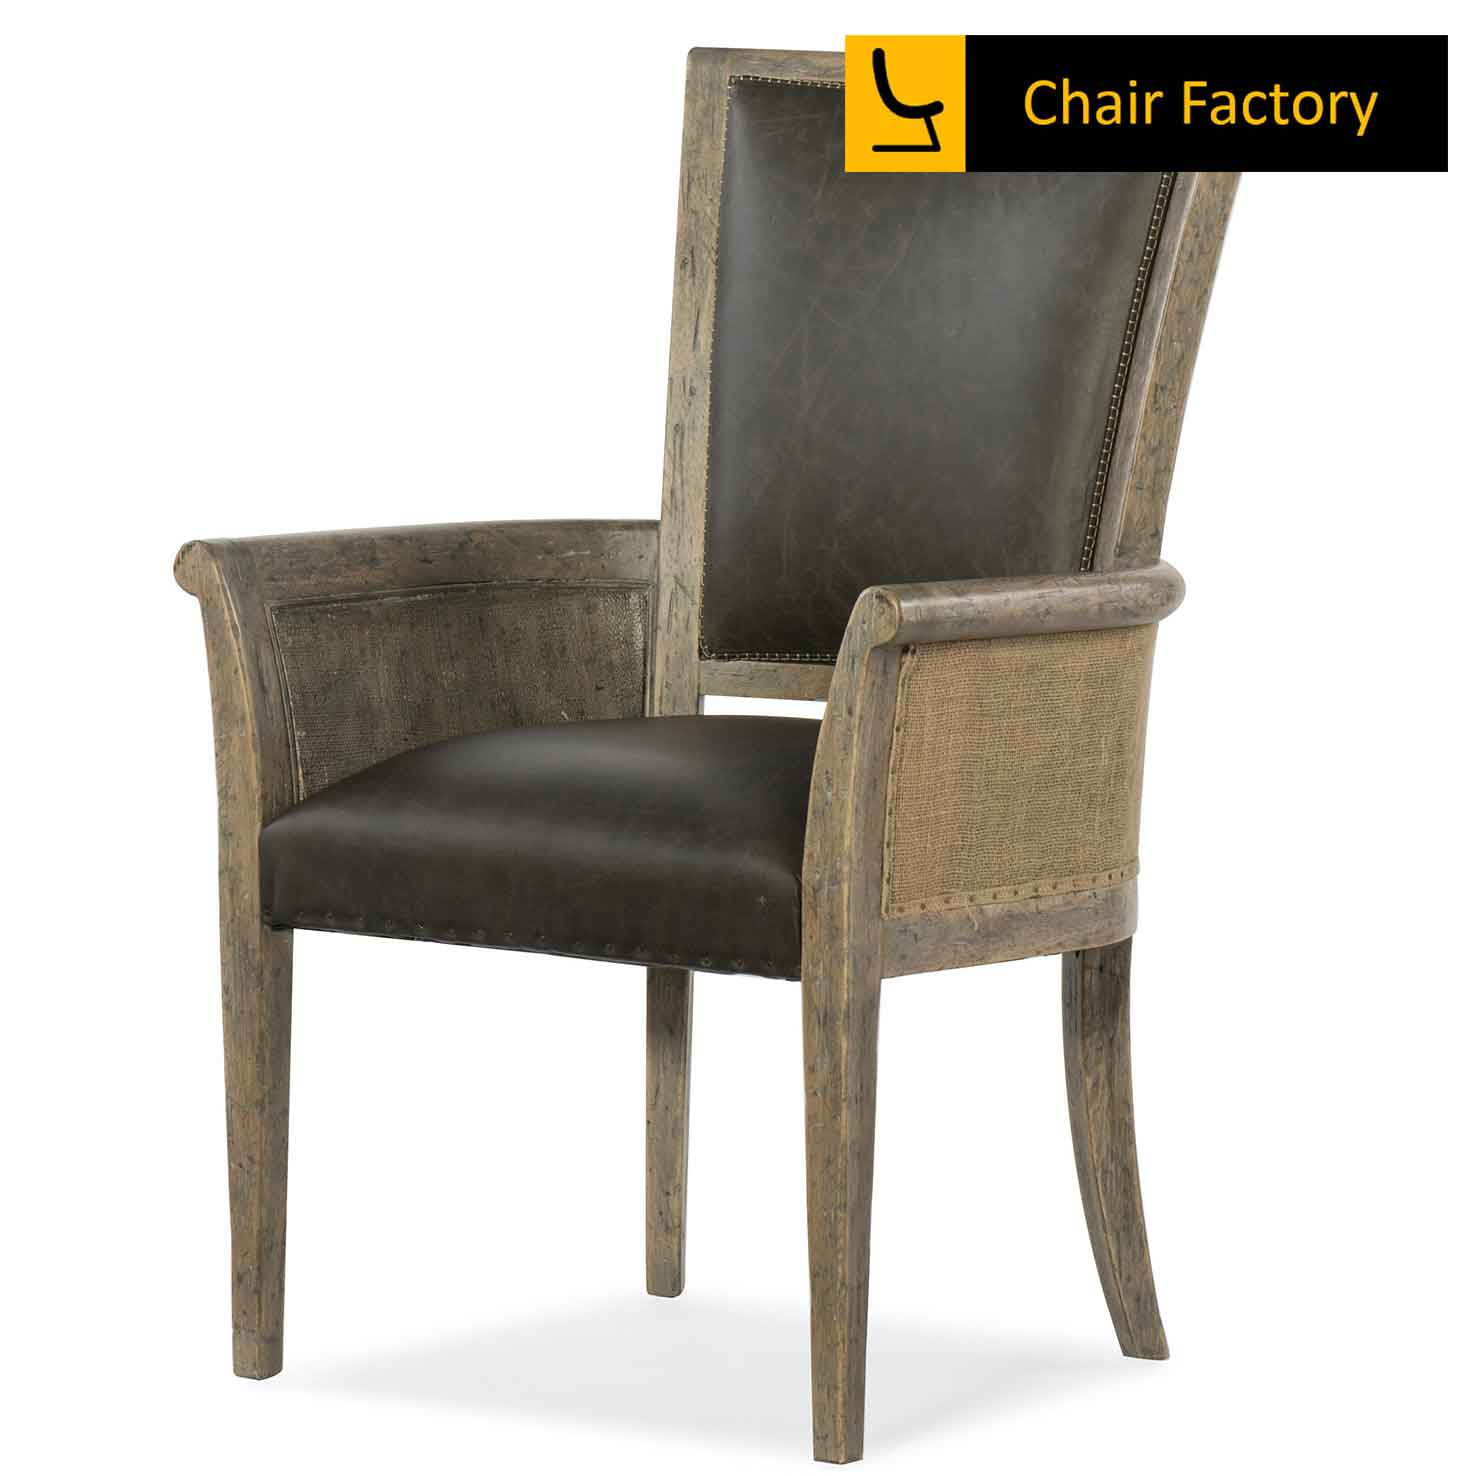 Filtzroy with Arms dining chair